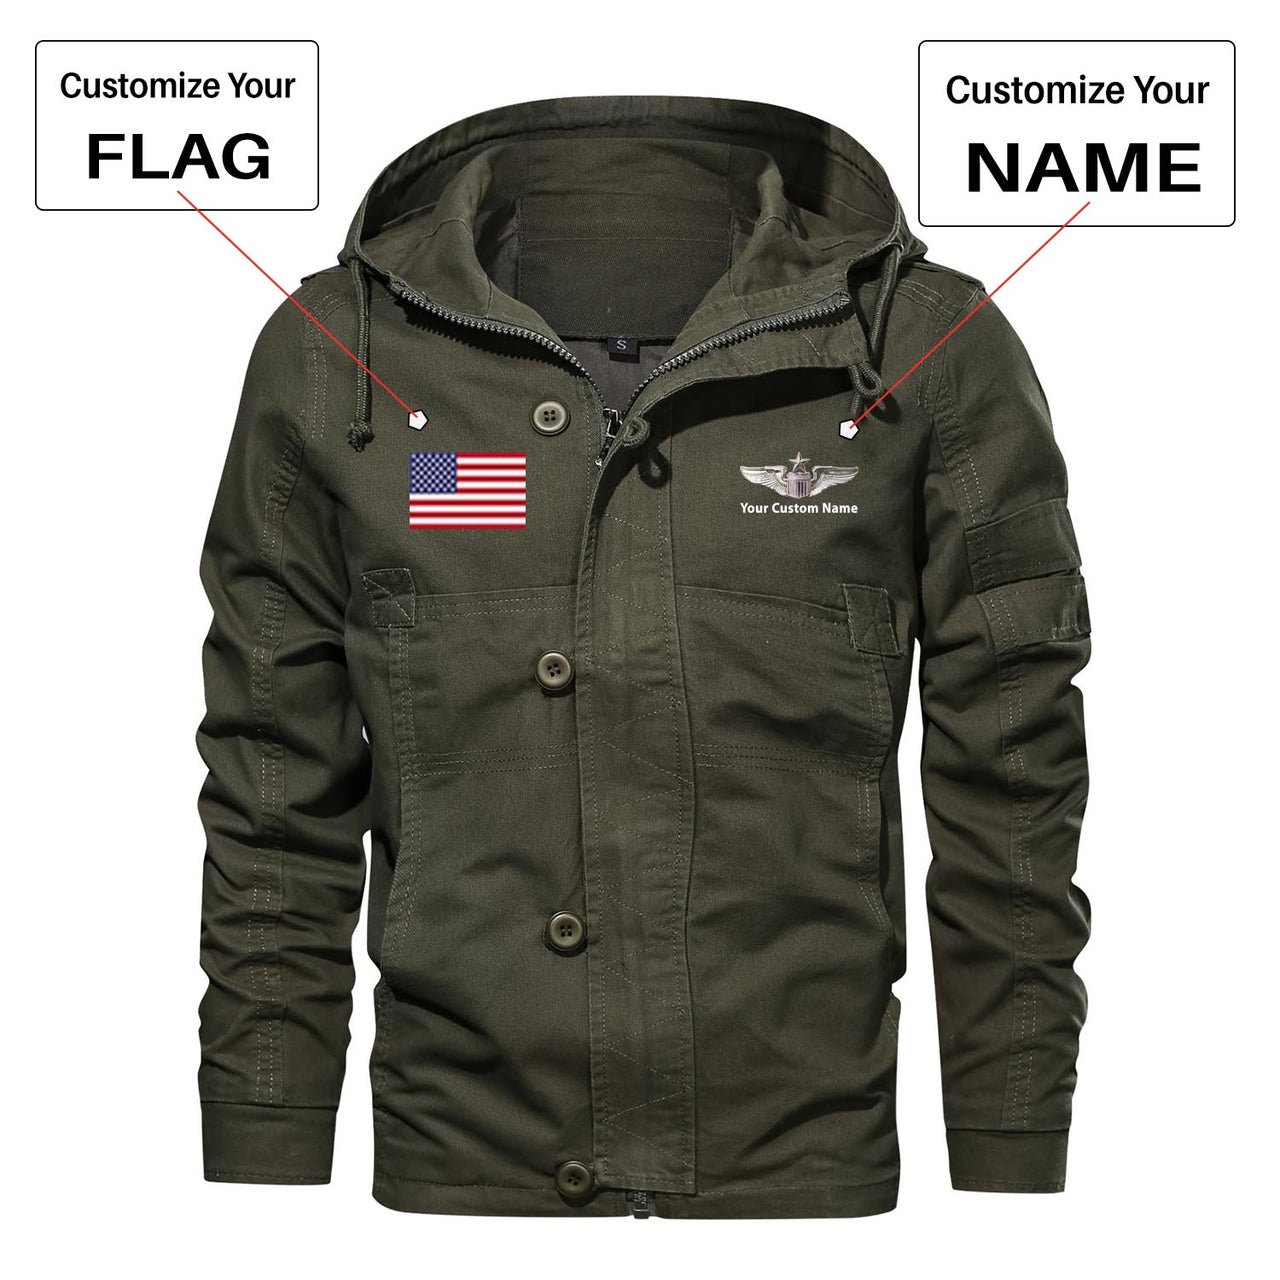 Custom Flag & Name "US Air Force & Star" Designed Cotton Jackets